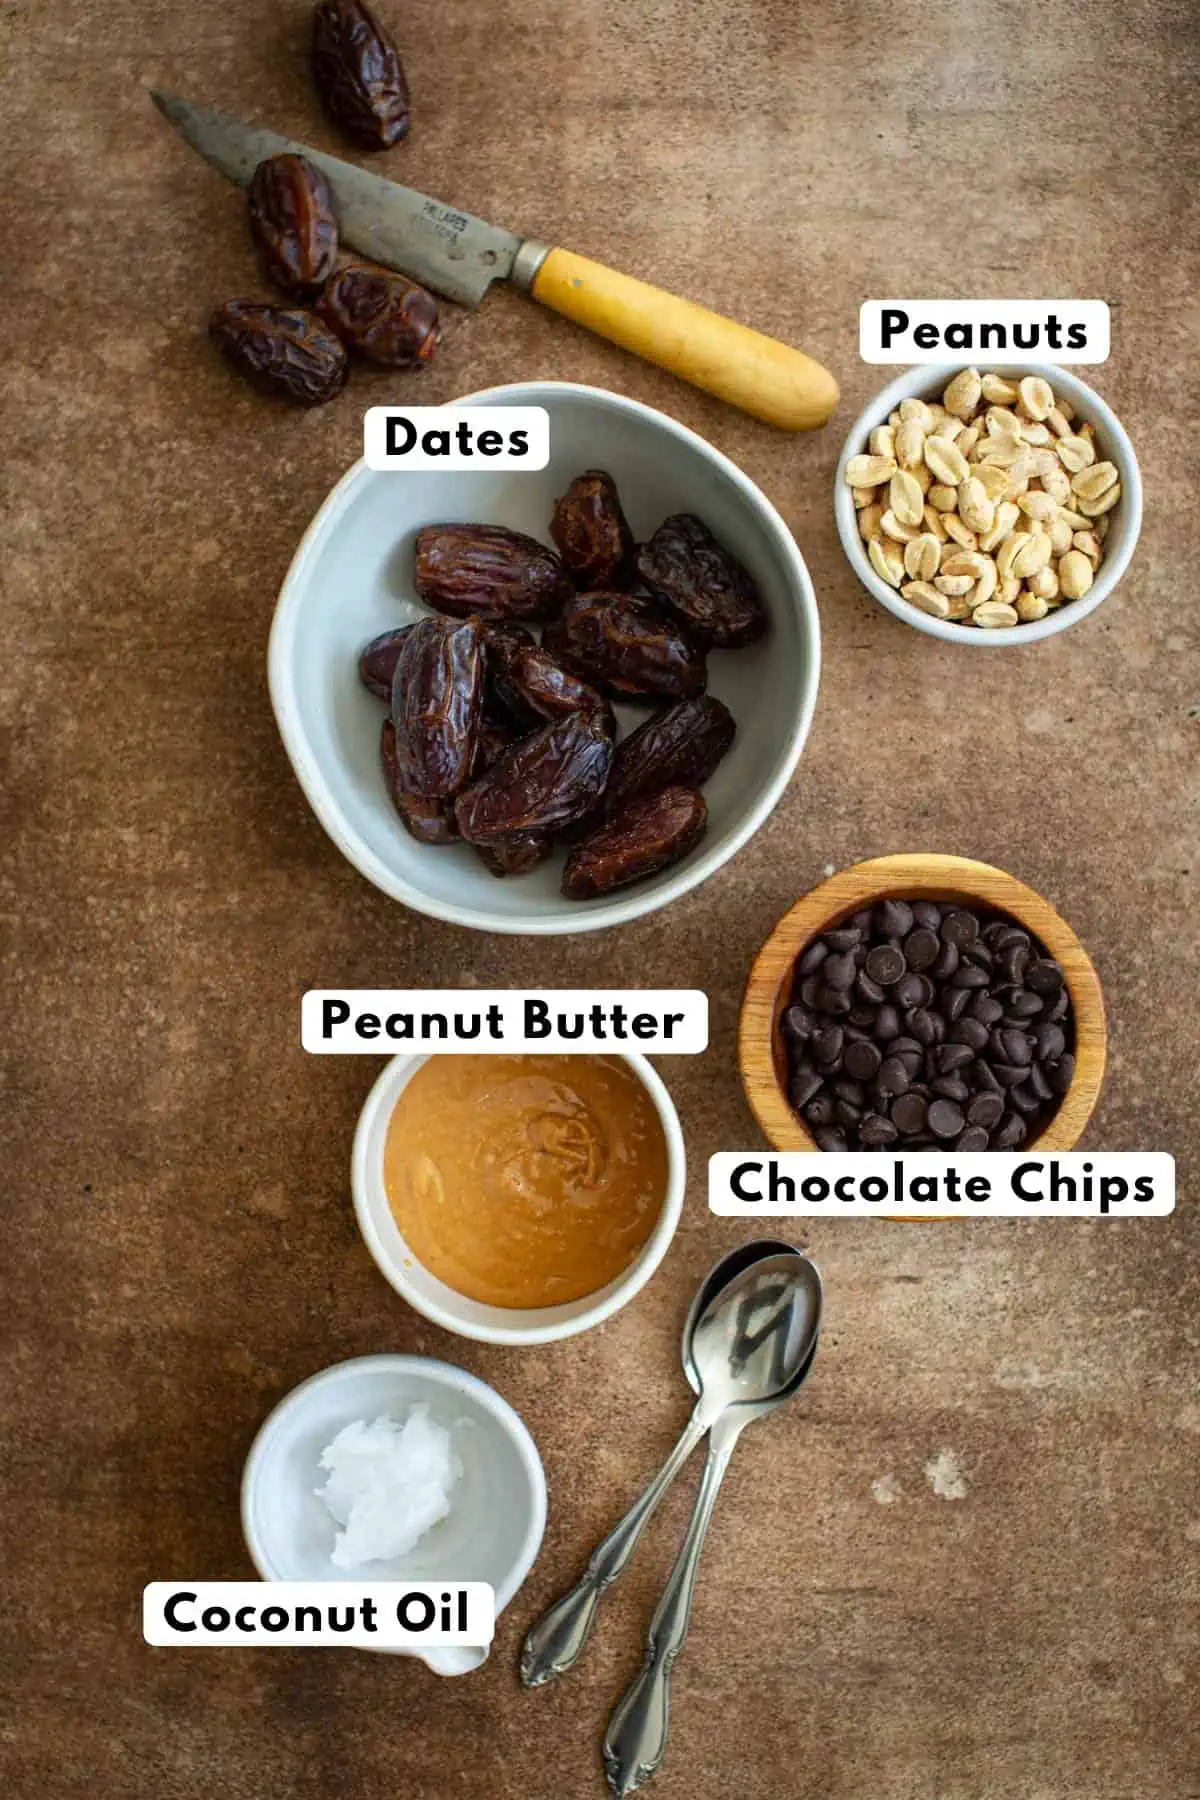 Date Snickers ingredients.